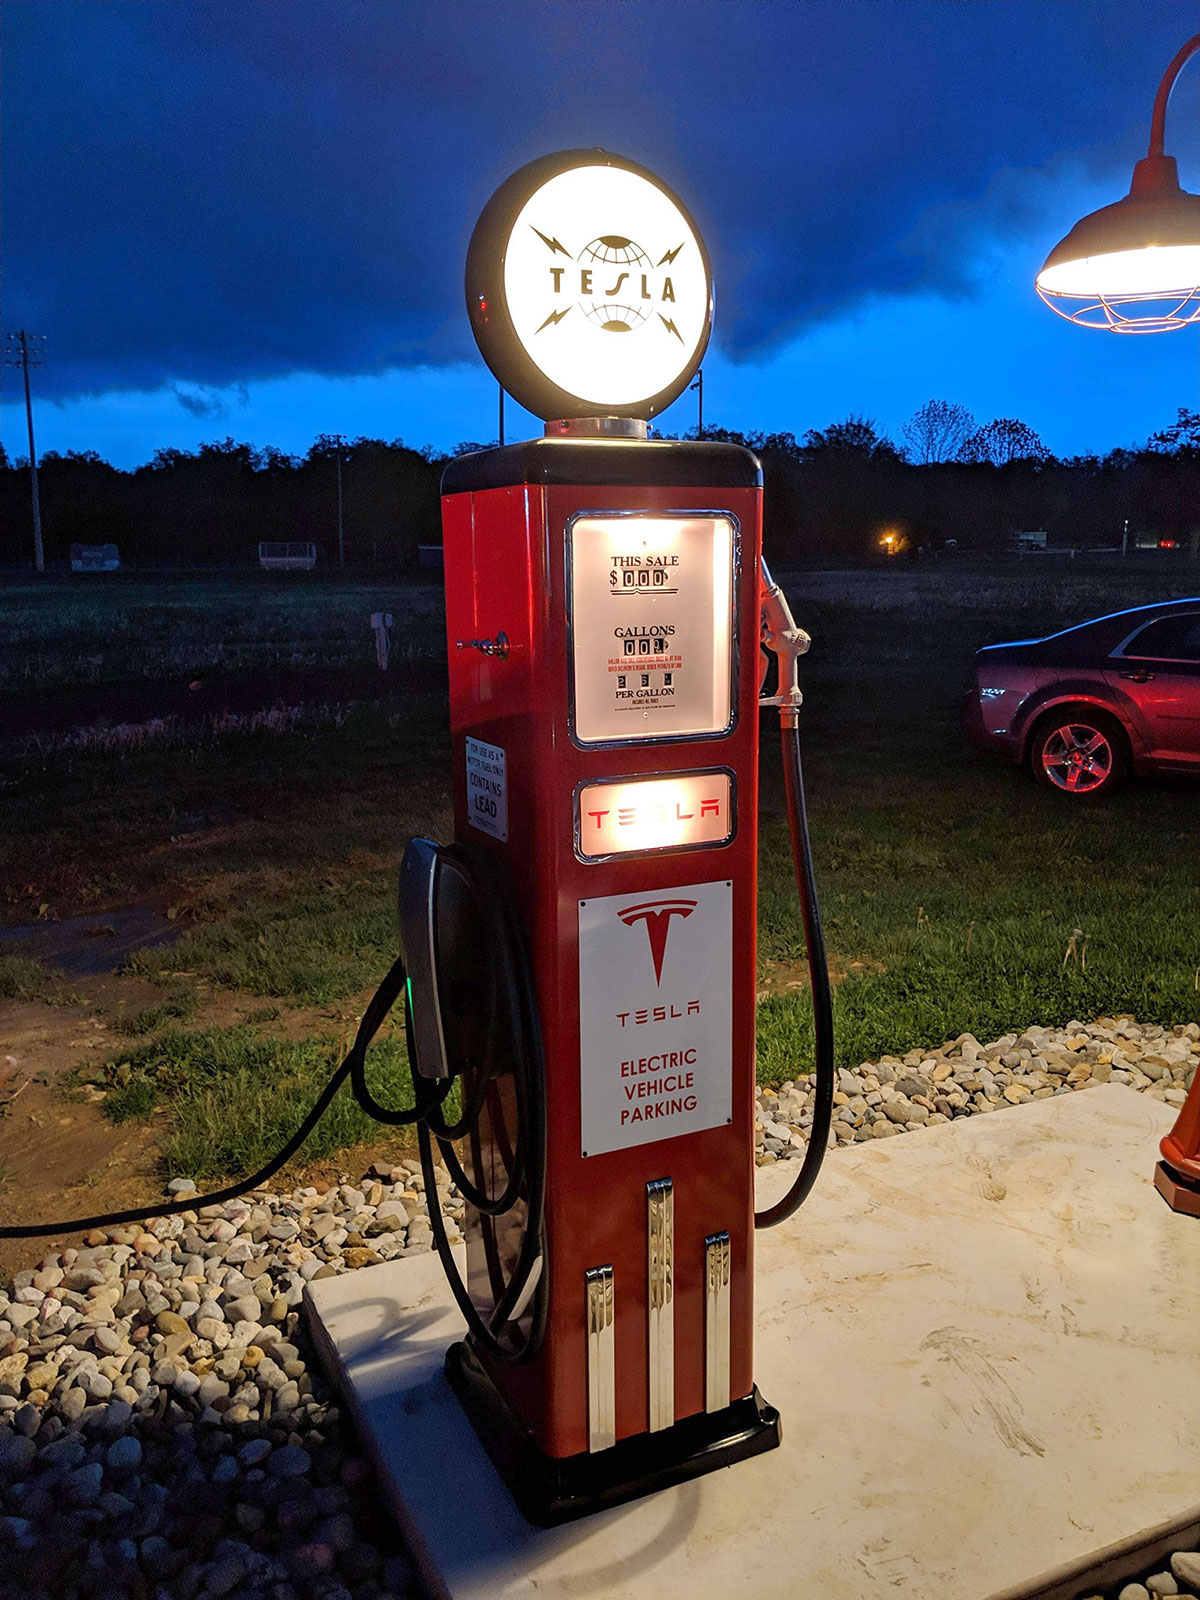 The retro styled Tesla Destination Charger at The Inside Scoop - Ice Cream Parlor in Coopersburg, PA 18036